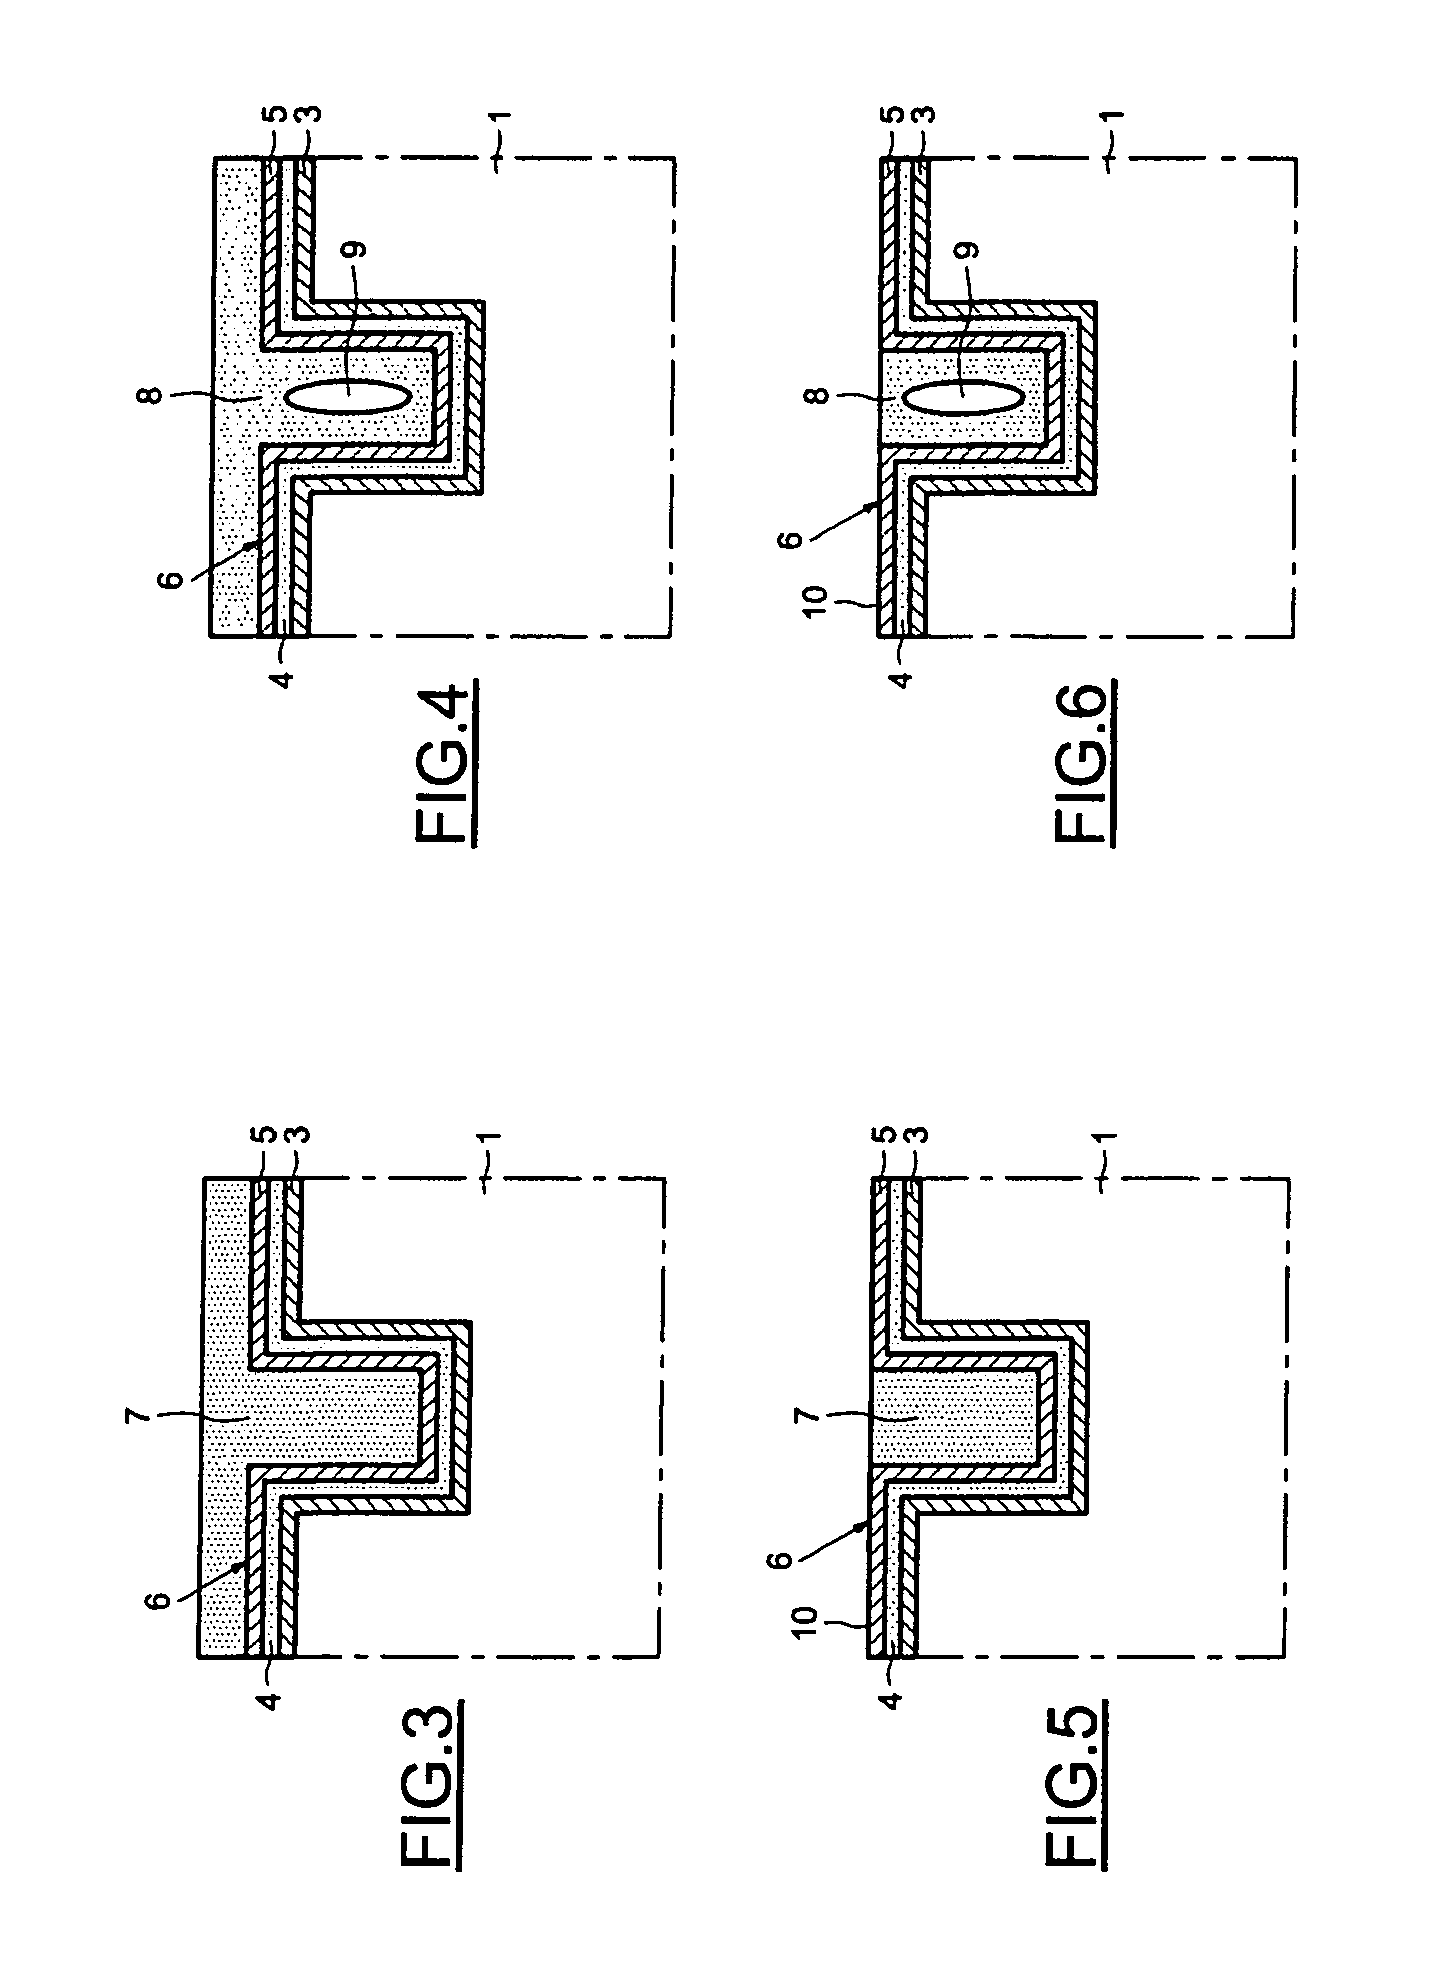 Integrated circuit comprising at least one capacitor and process for forming the capacitor